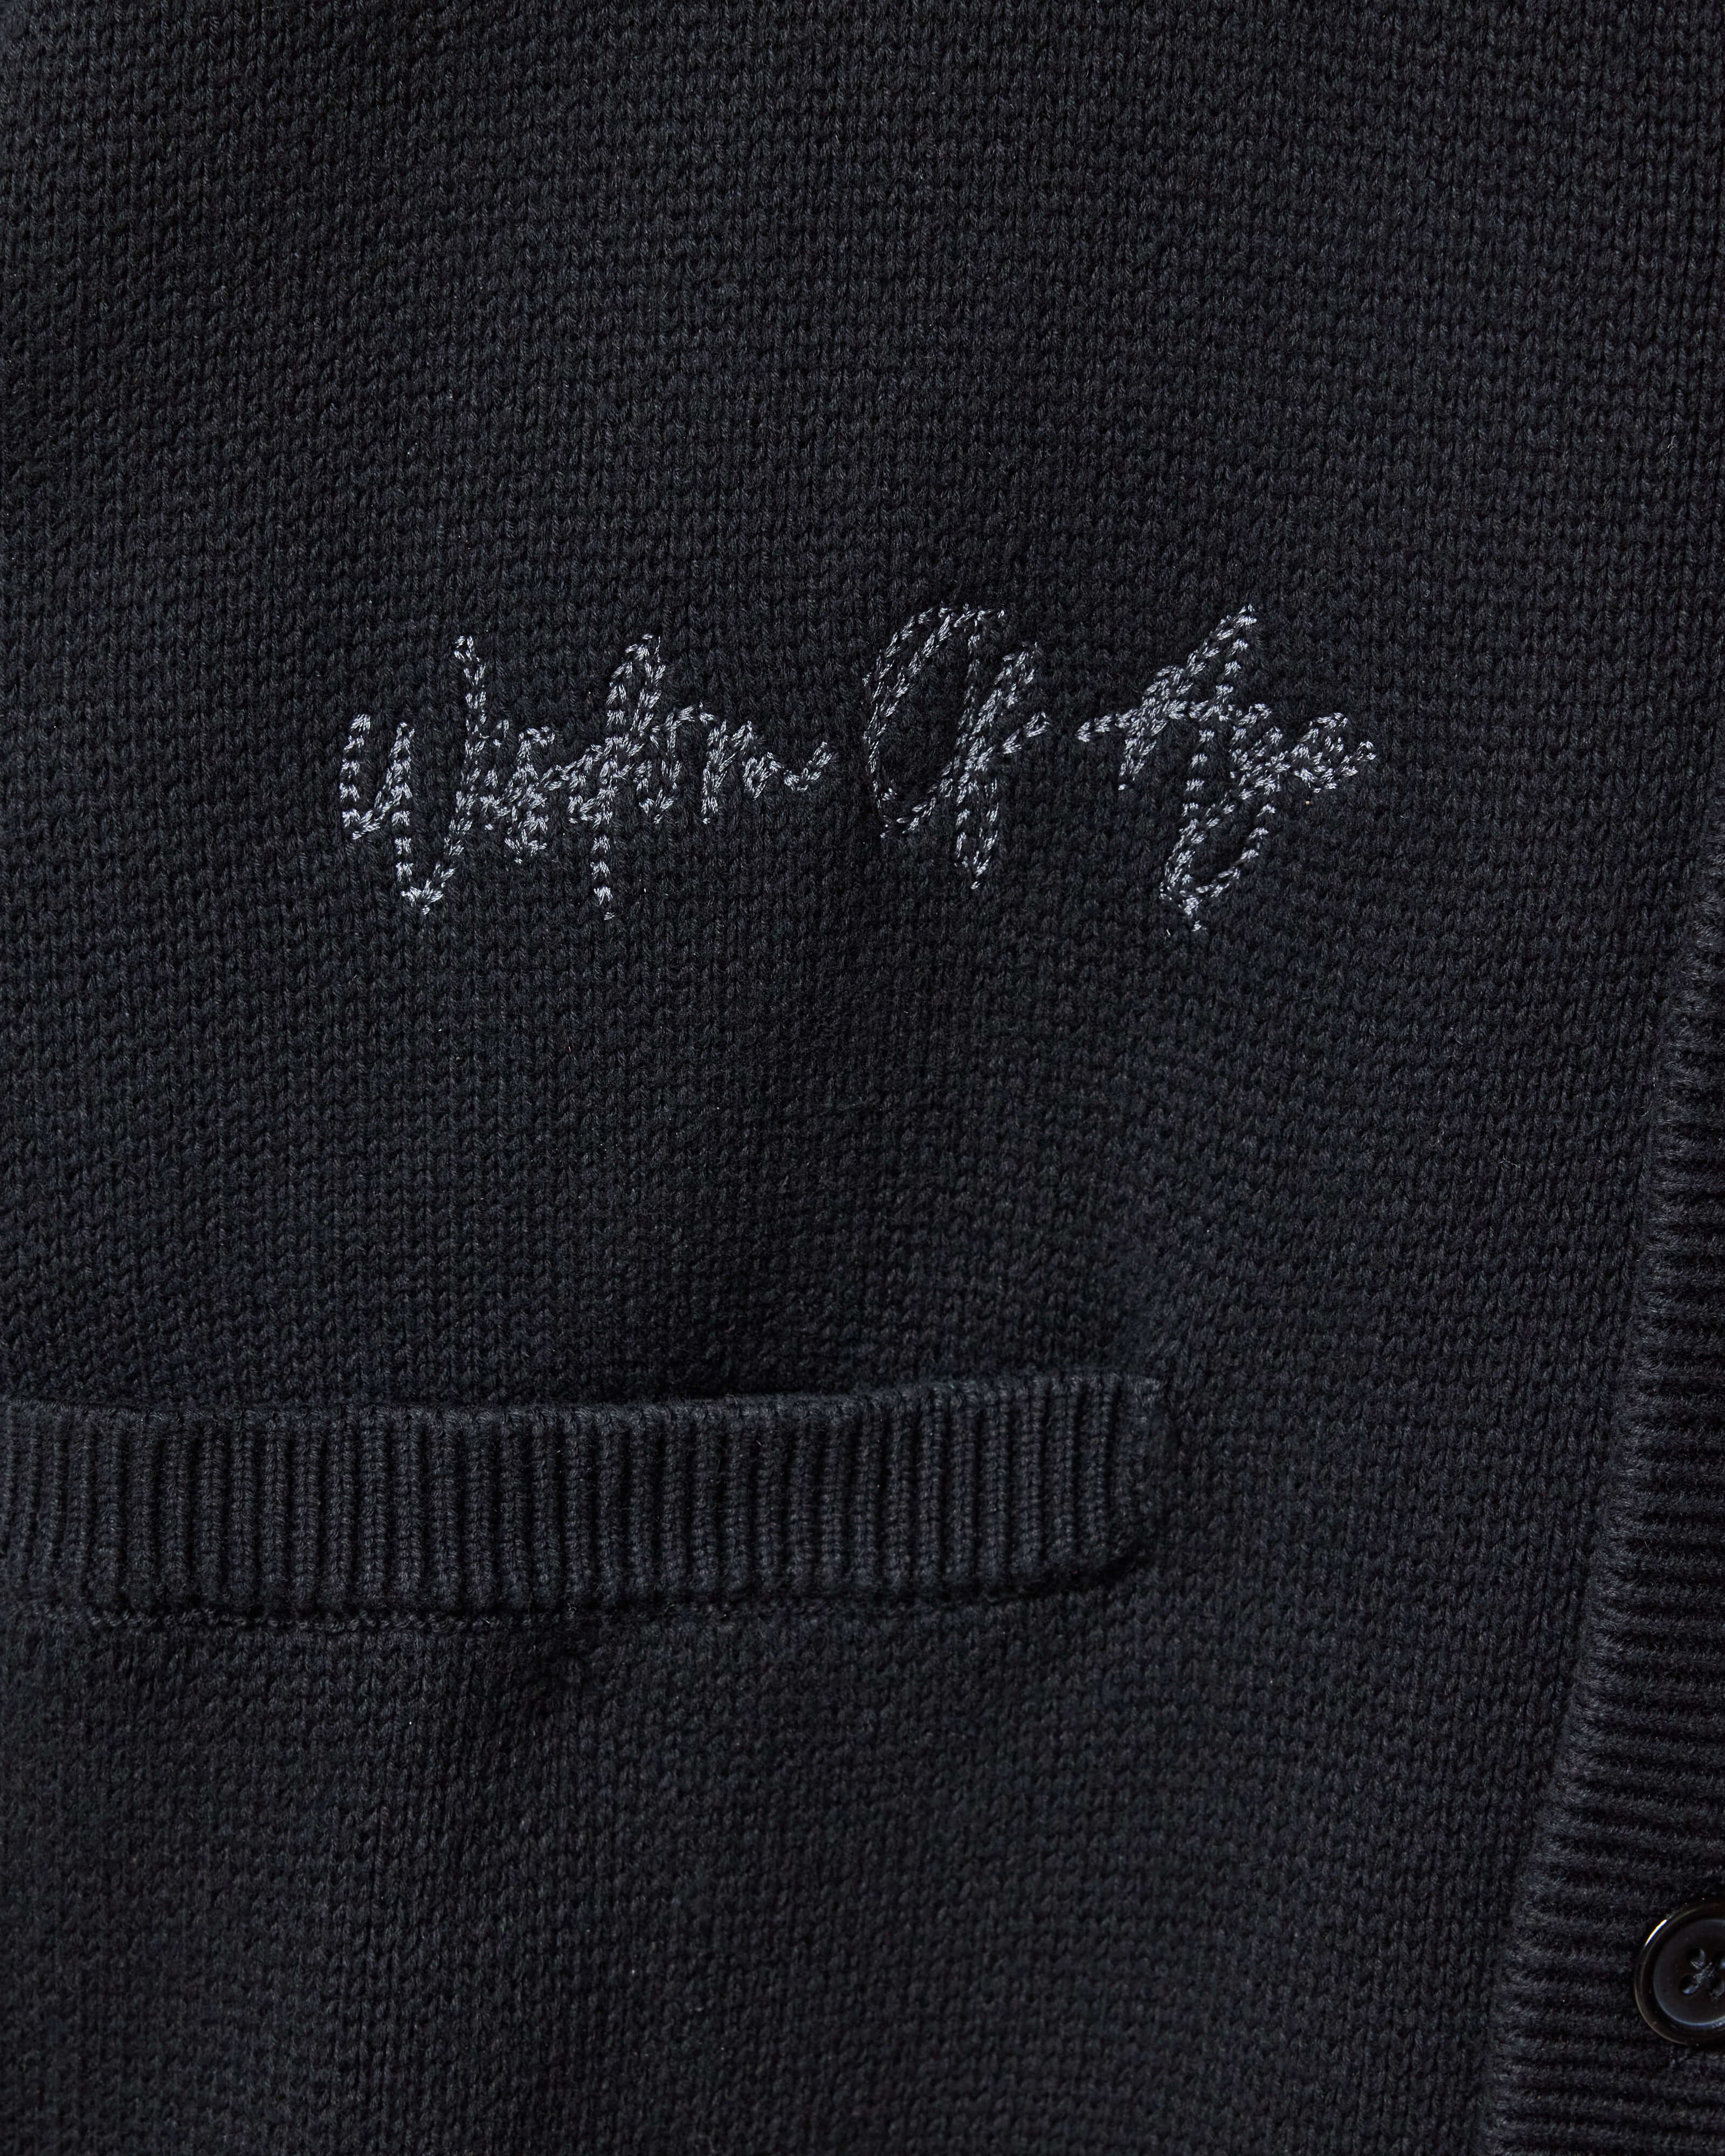 Closer Look at top right chest of the front of the cardigan with the brand name "Wisdom of Age" embroidered in a handwritten script cursive.